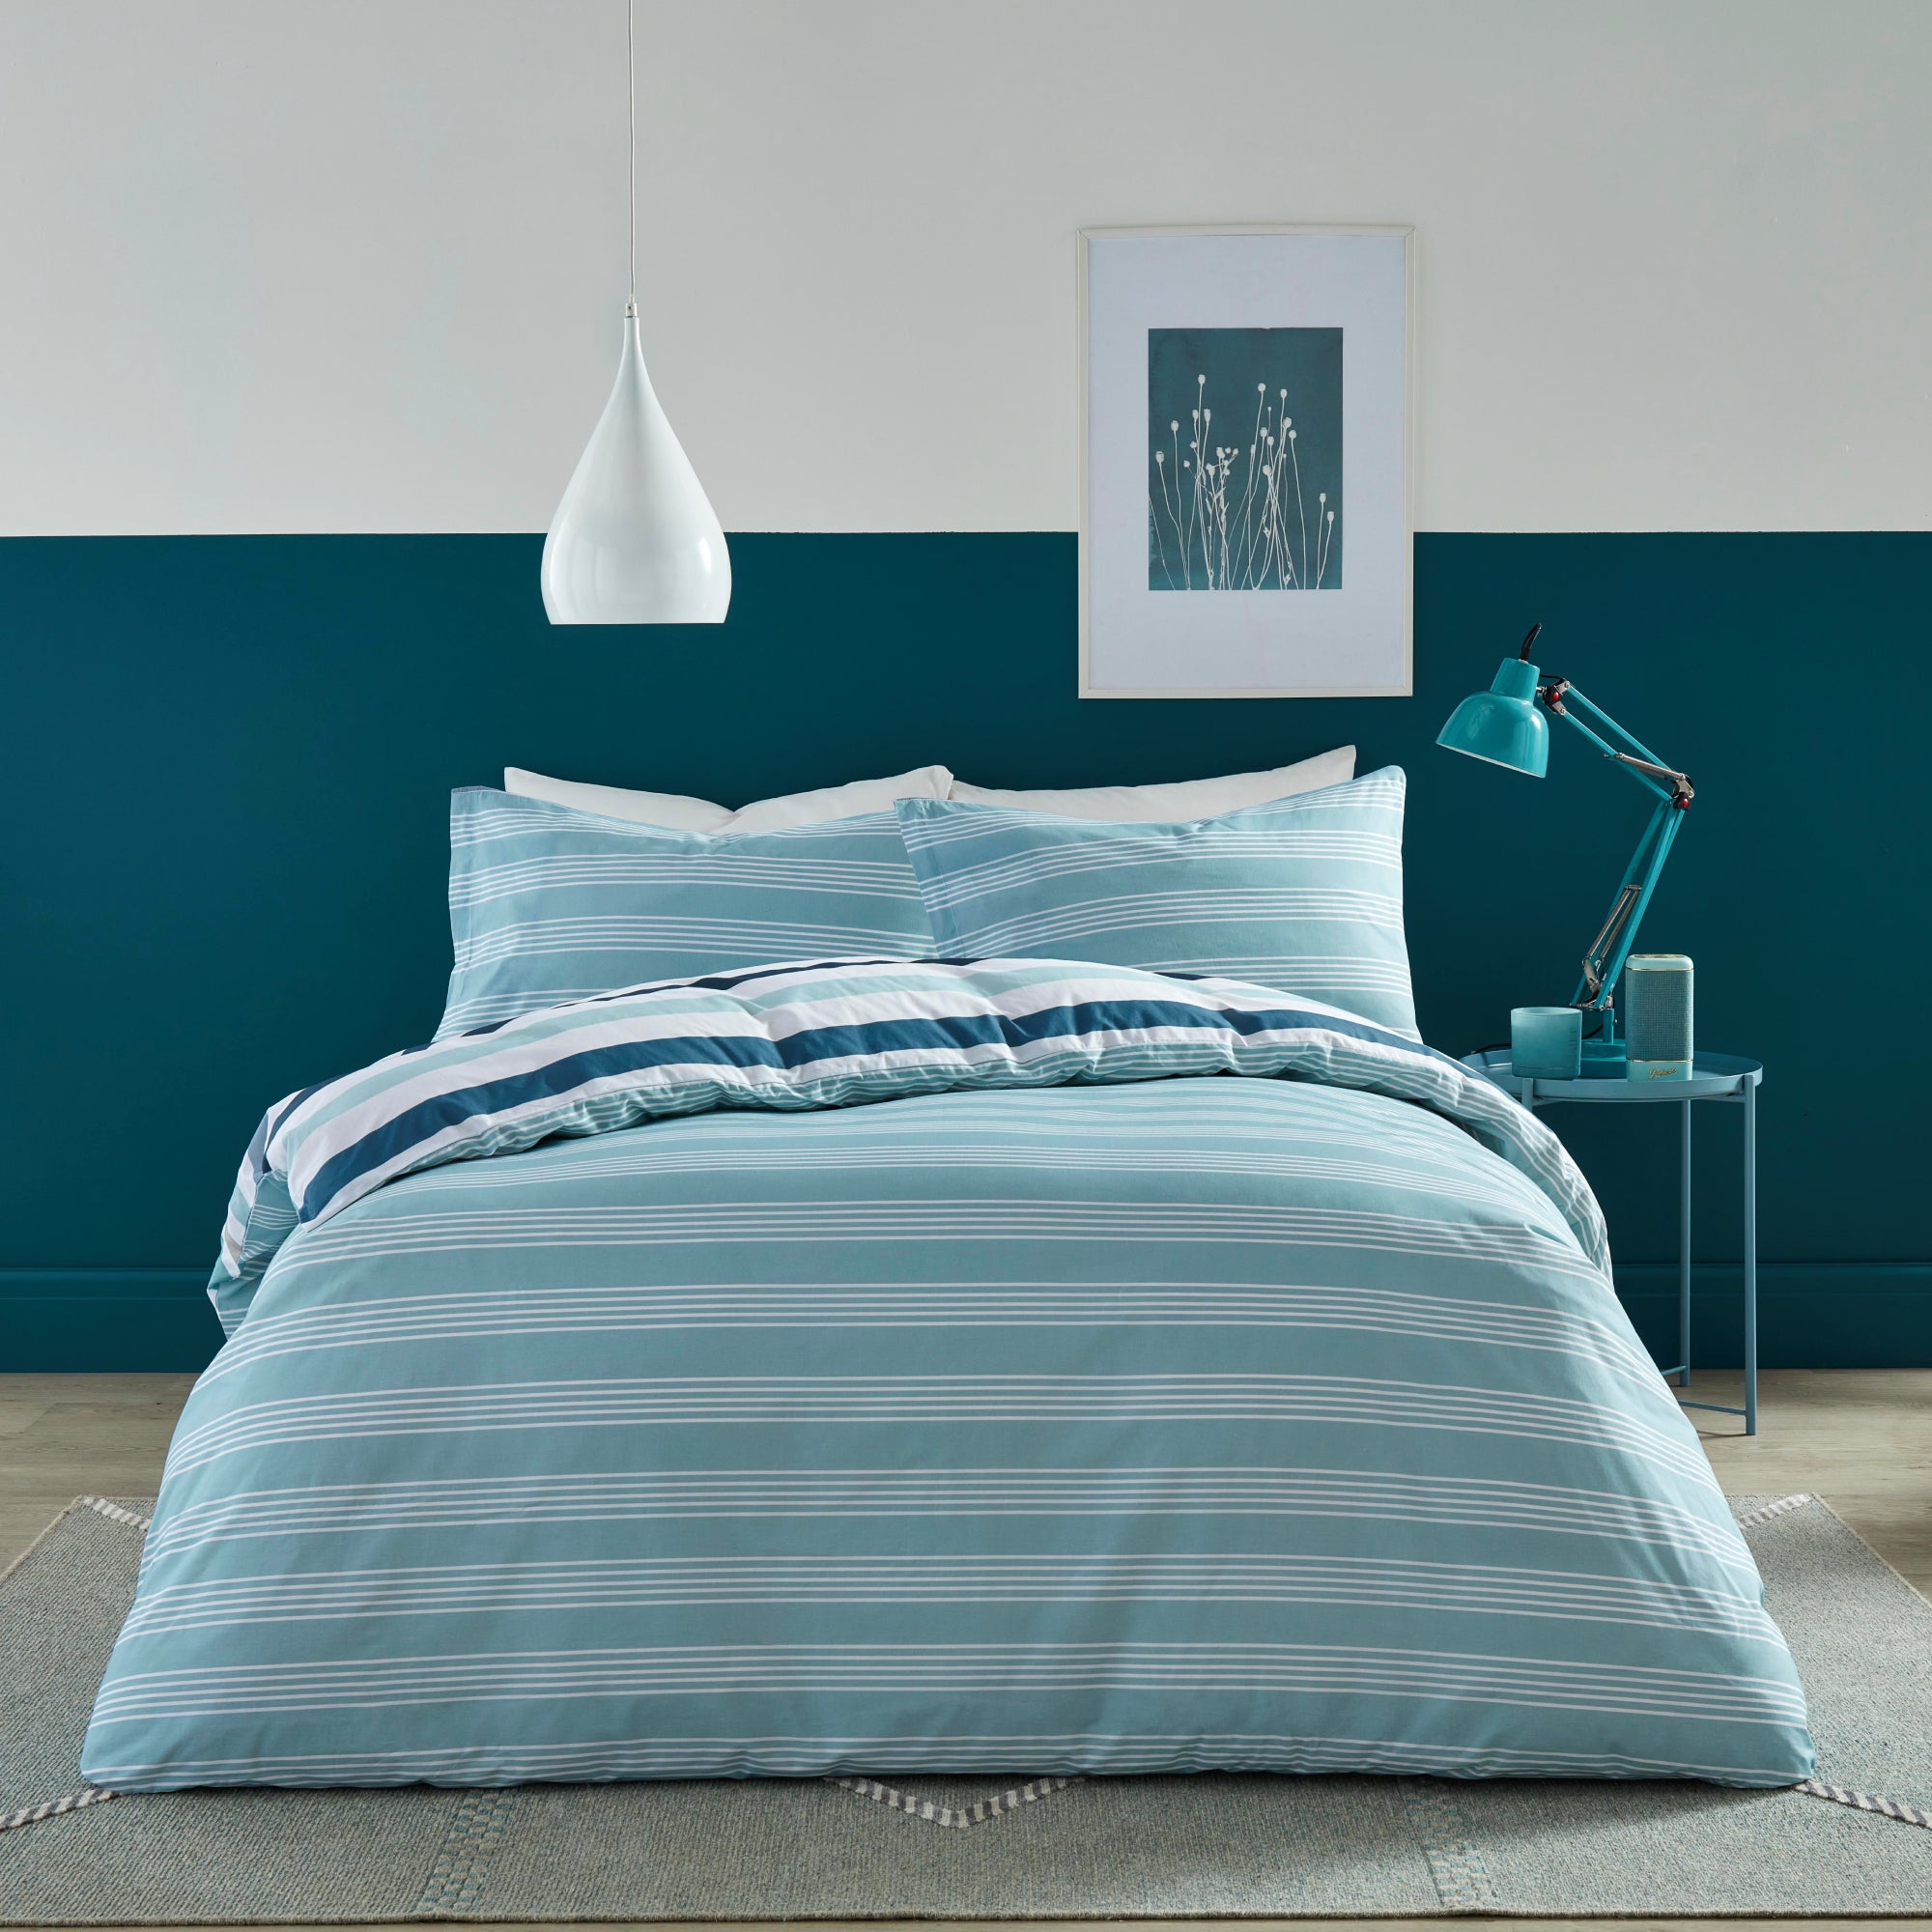 Duvet Cover Set Carlson Stripe by Fusion in Teal